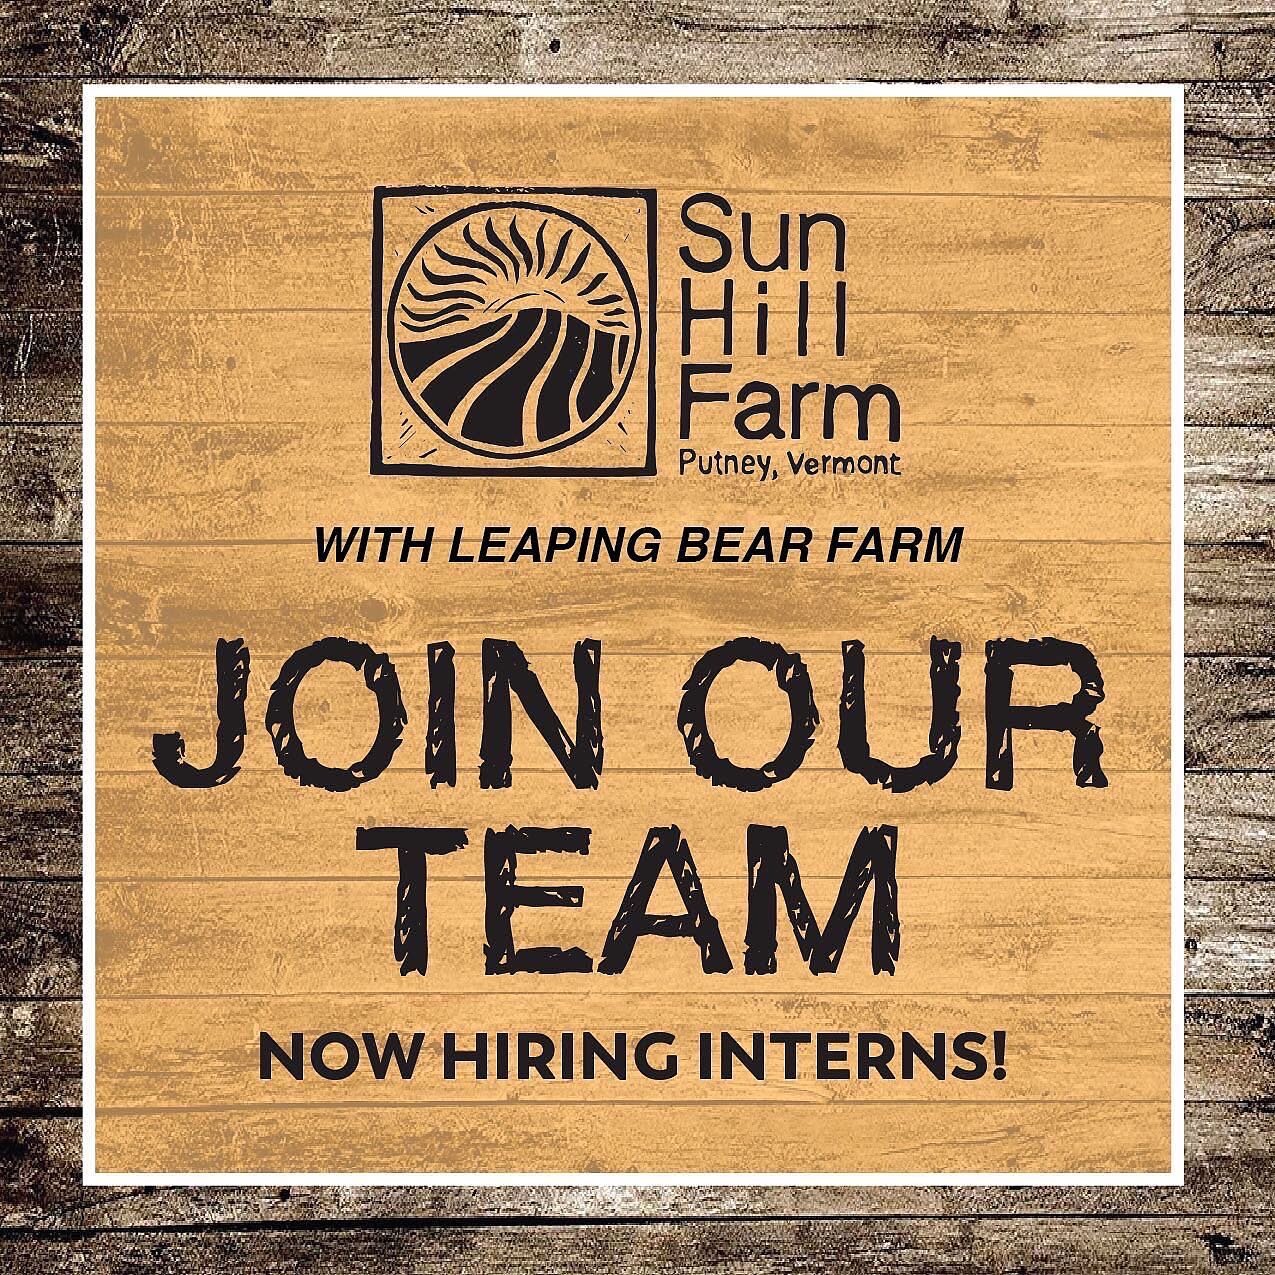 Sun Hill Farm (in collaboration with @leapingbearfarm) is excited to announce we are looking for interns for the 2022 season! Come join us and experience the beauty and fun of learning about regenerative agriculture and growing nutrient rich foods on